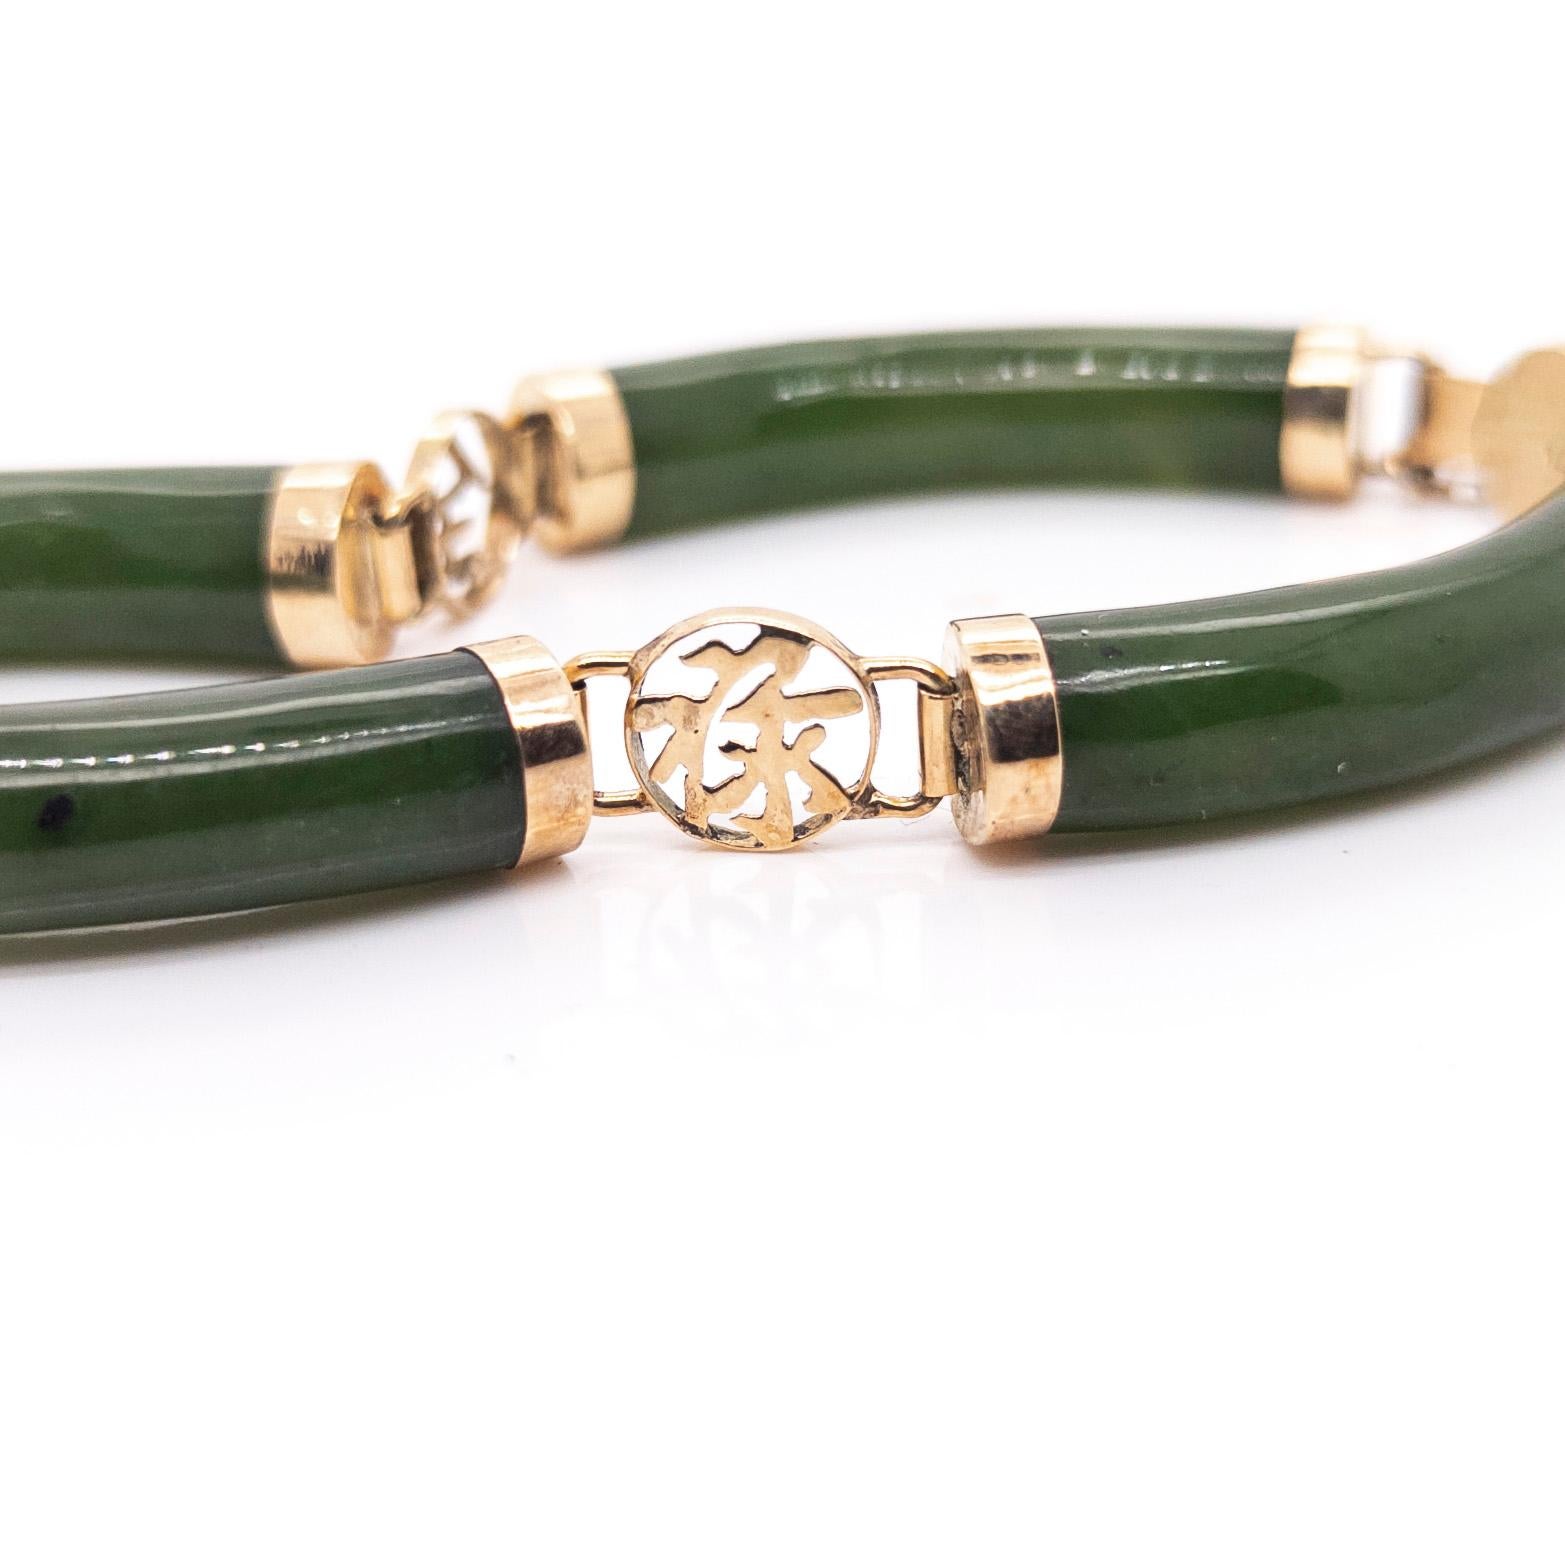 Vintage Chinese 14k Gold & Jade Bracelet with Auspicious Sanxing Characters For Sale 4